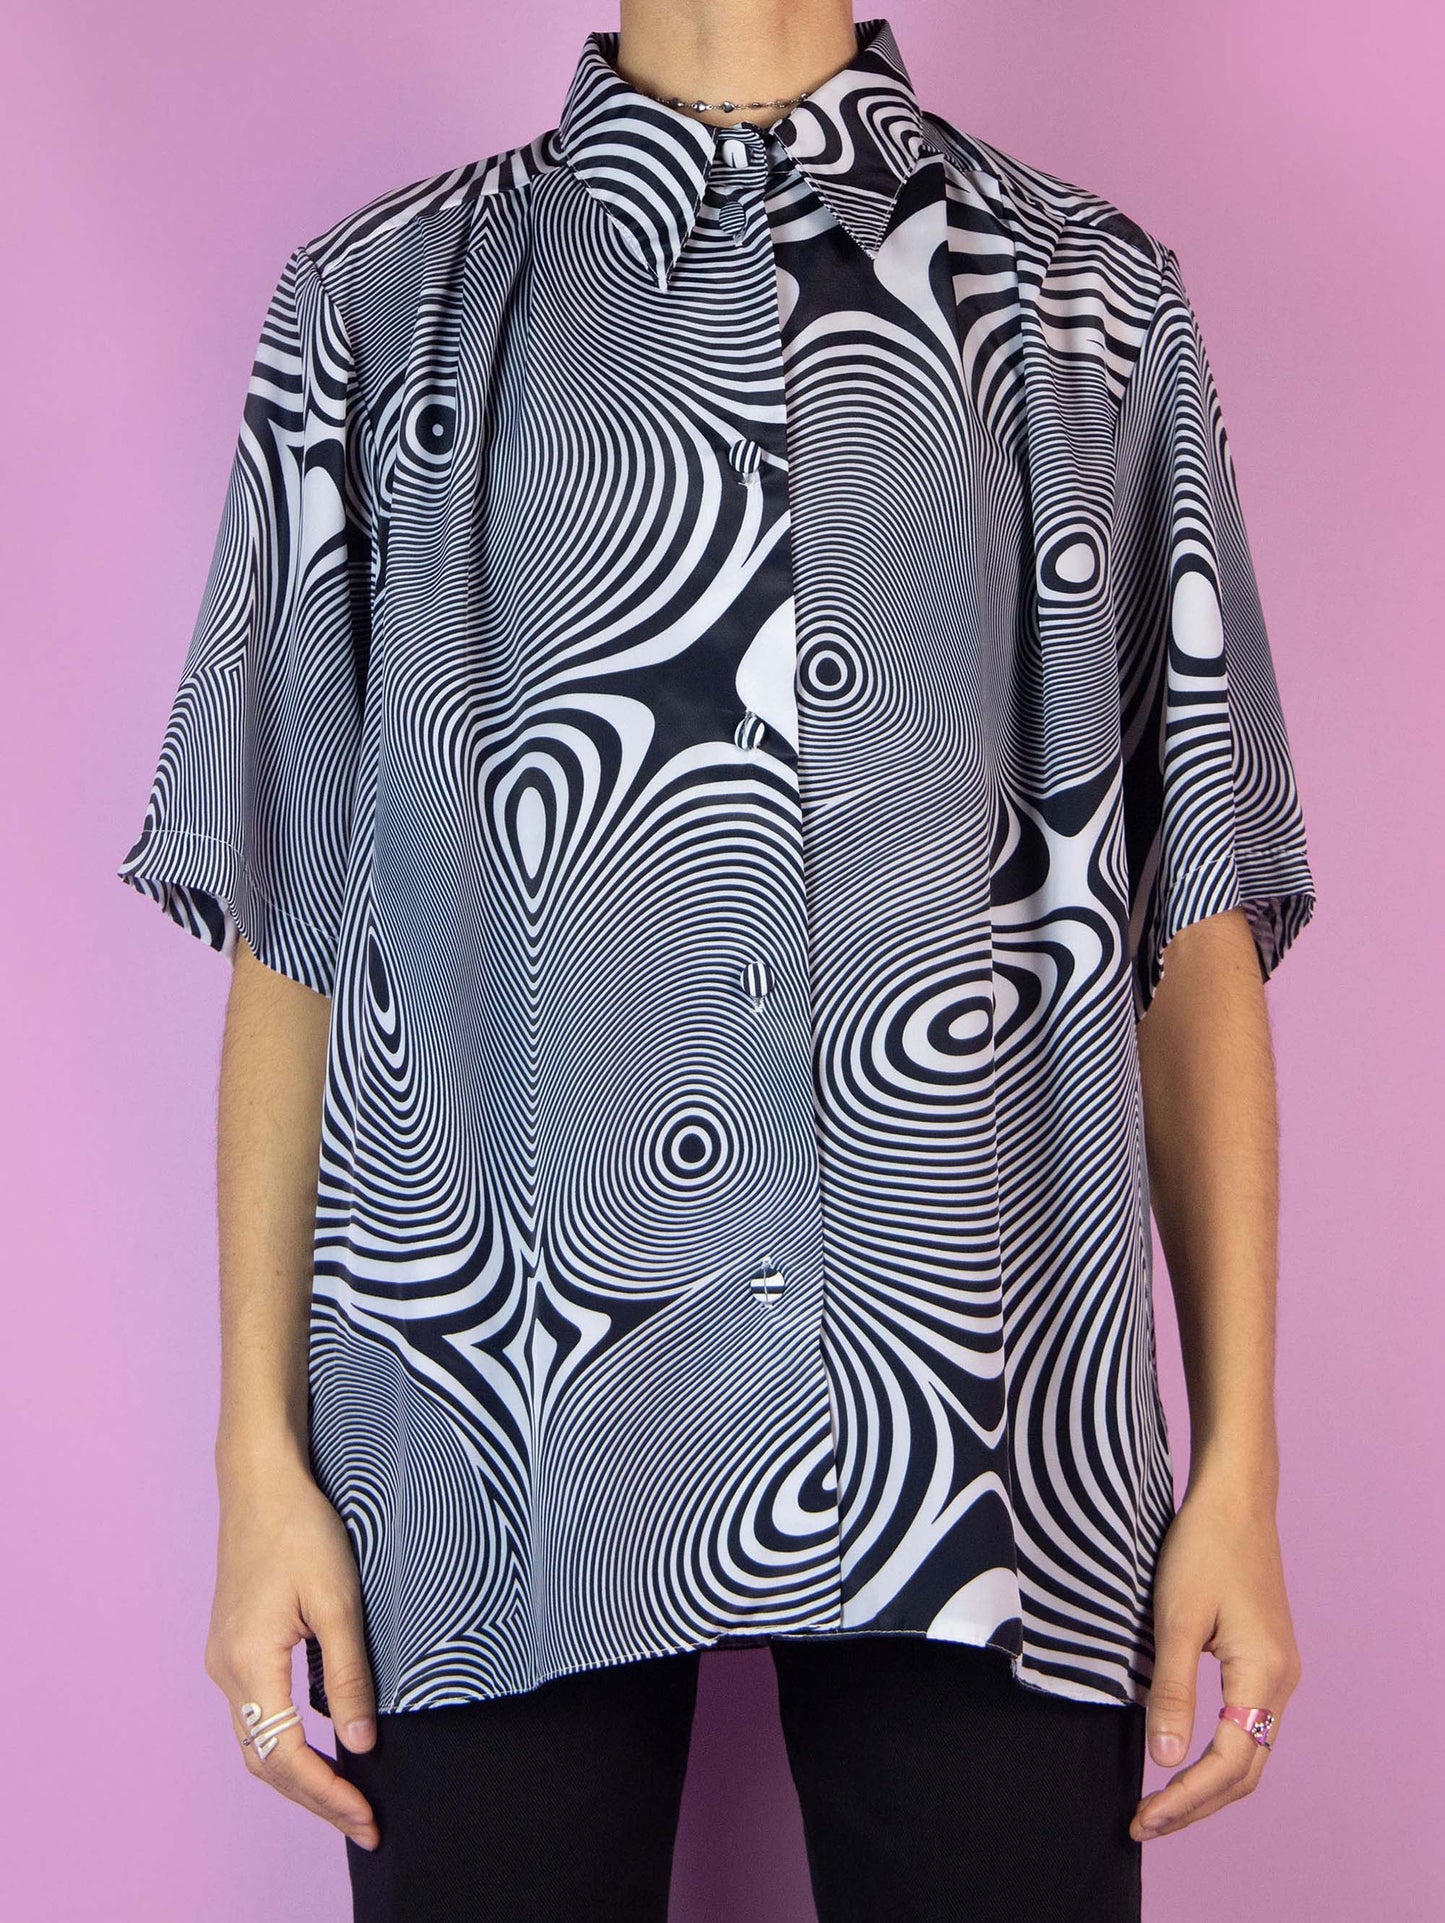 The Y2K Psychedelic Swirl Graphic Shirt is a vintage black and white short-sleeved blouse with a collar and buttons. Cyber grunge 2000s festival rave summer party shirt.